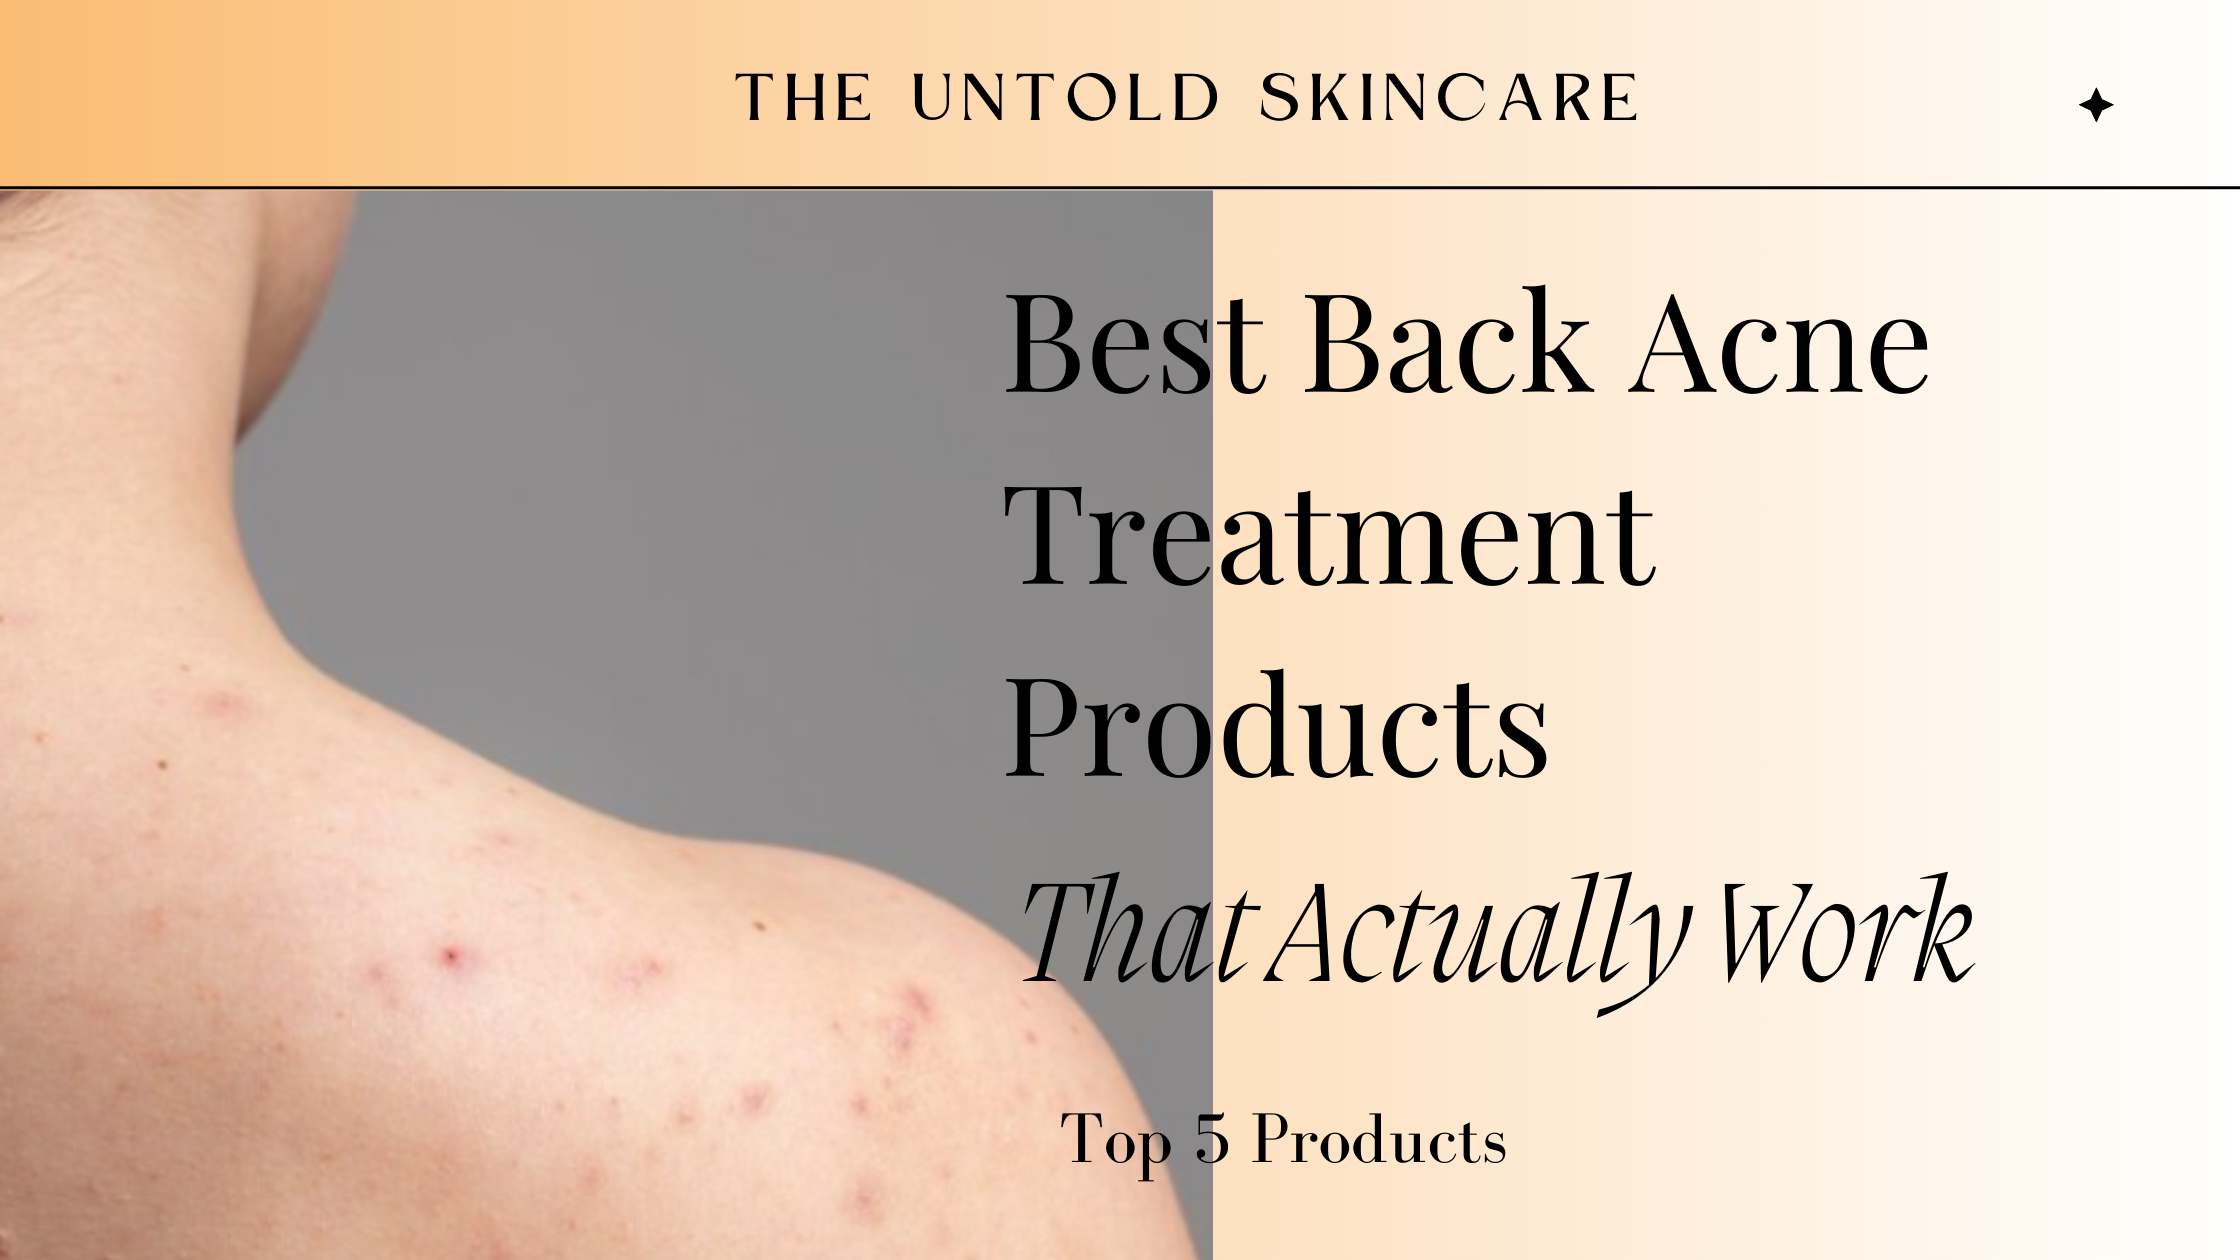 Best Back Acne Treatment Products That Actually Work: Top 5 Products